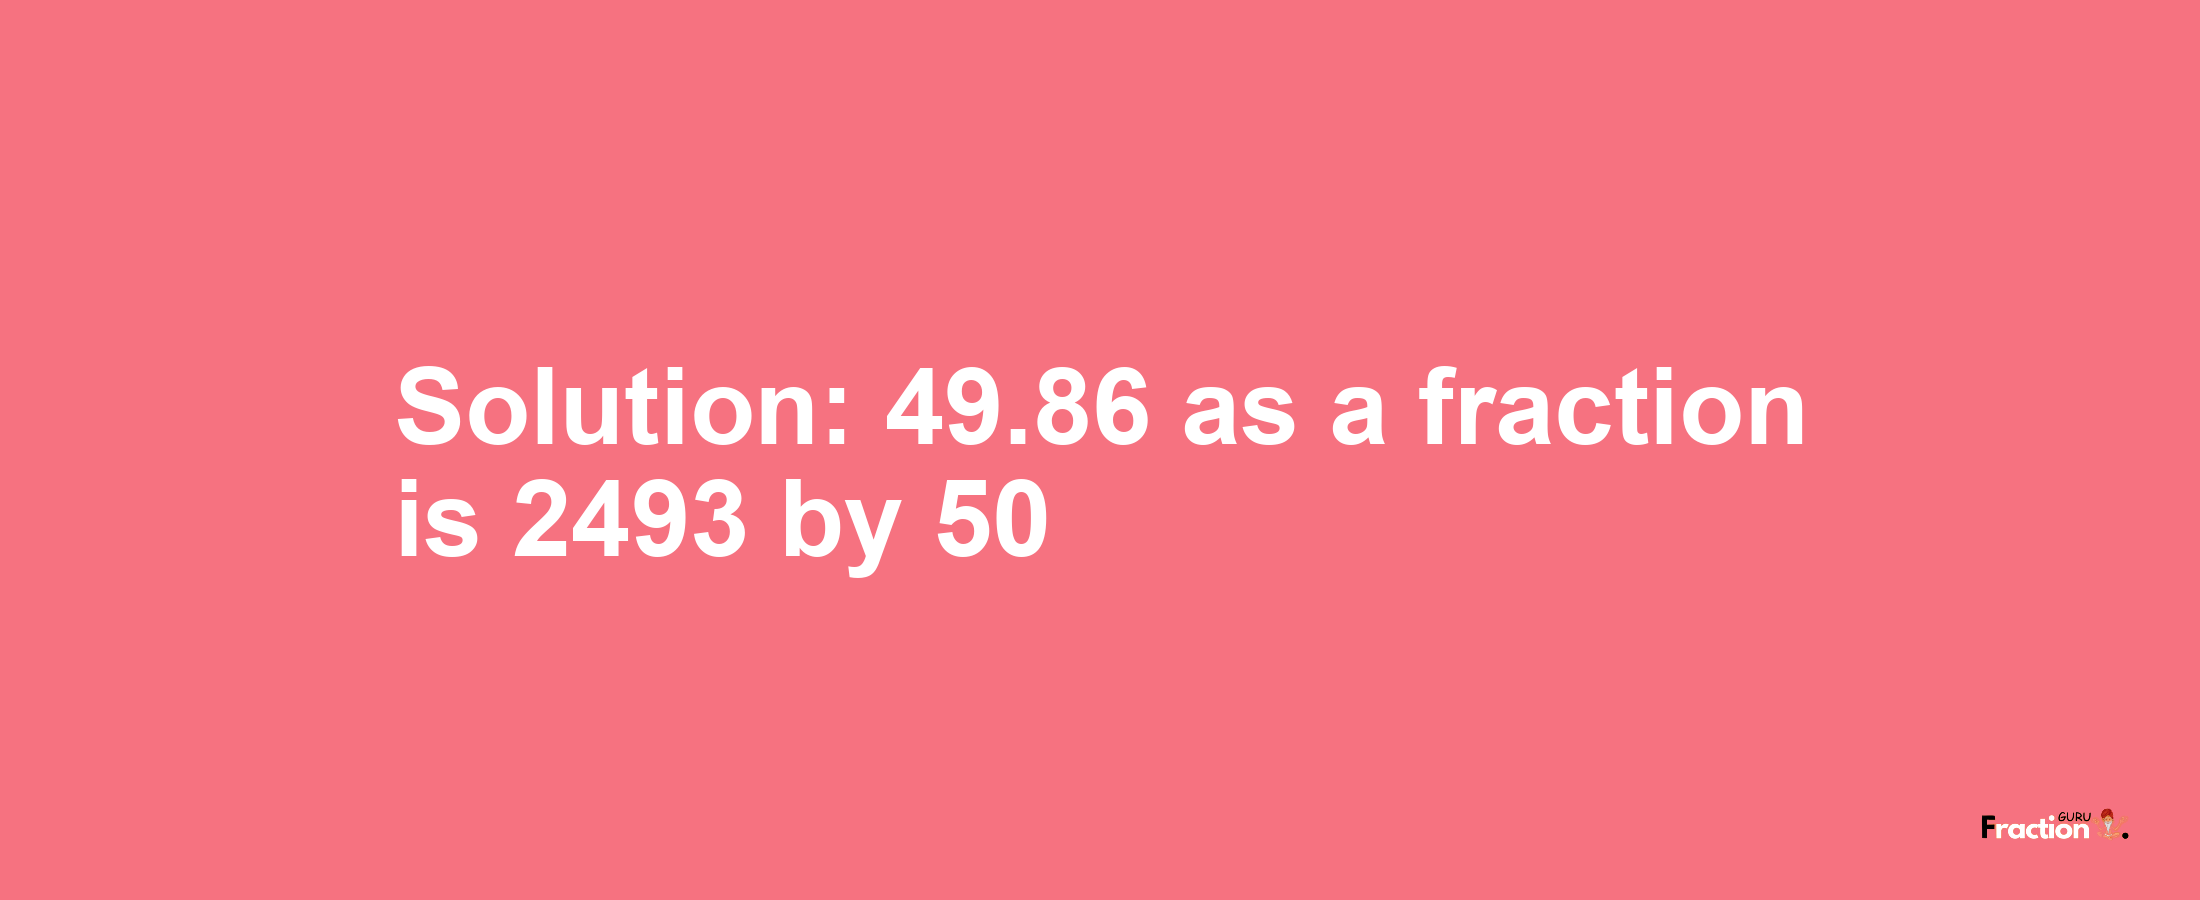 Solution:49.86 as a fraction is 2493/50